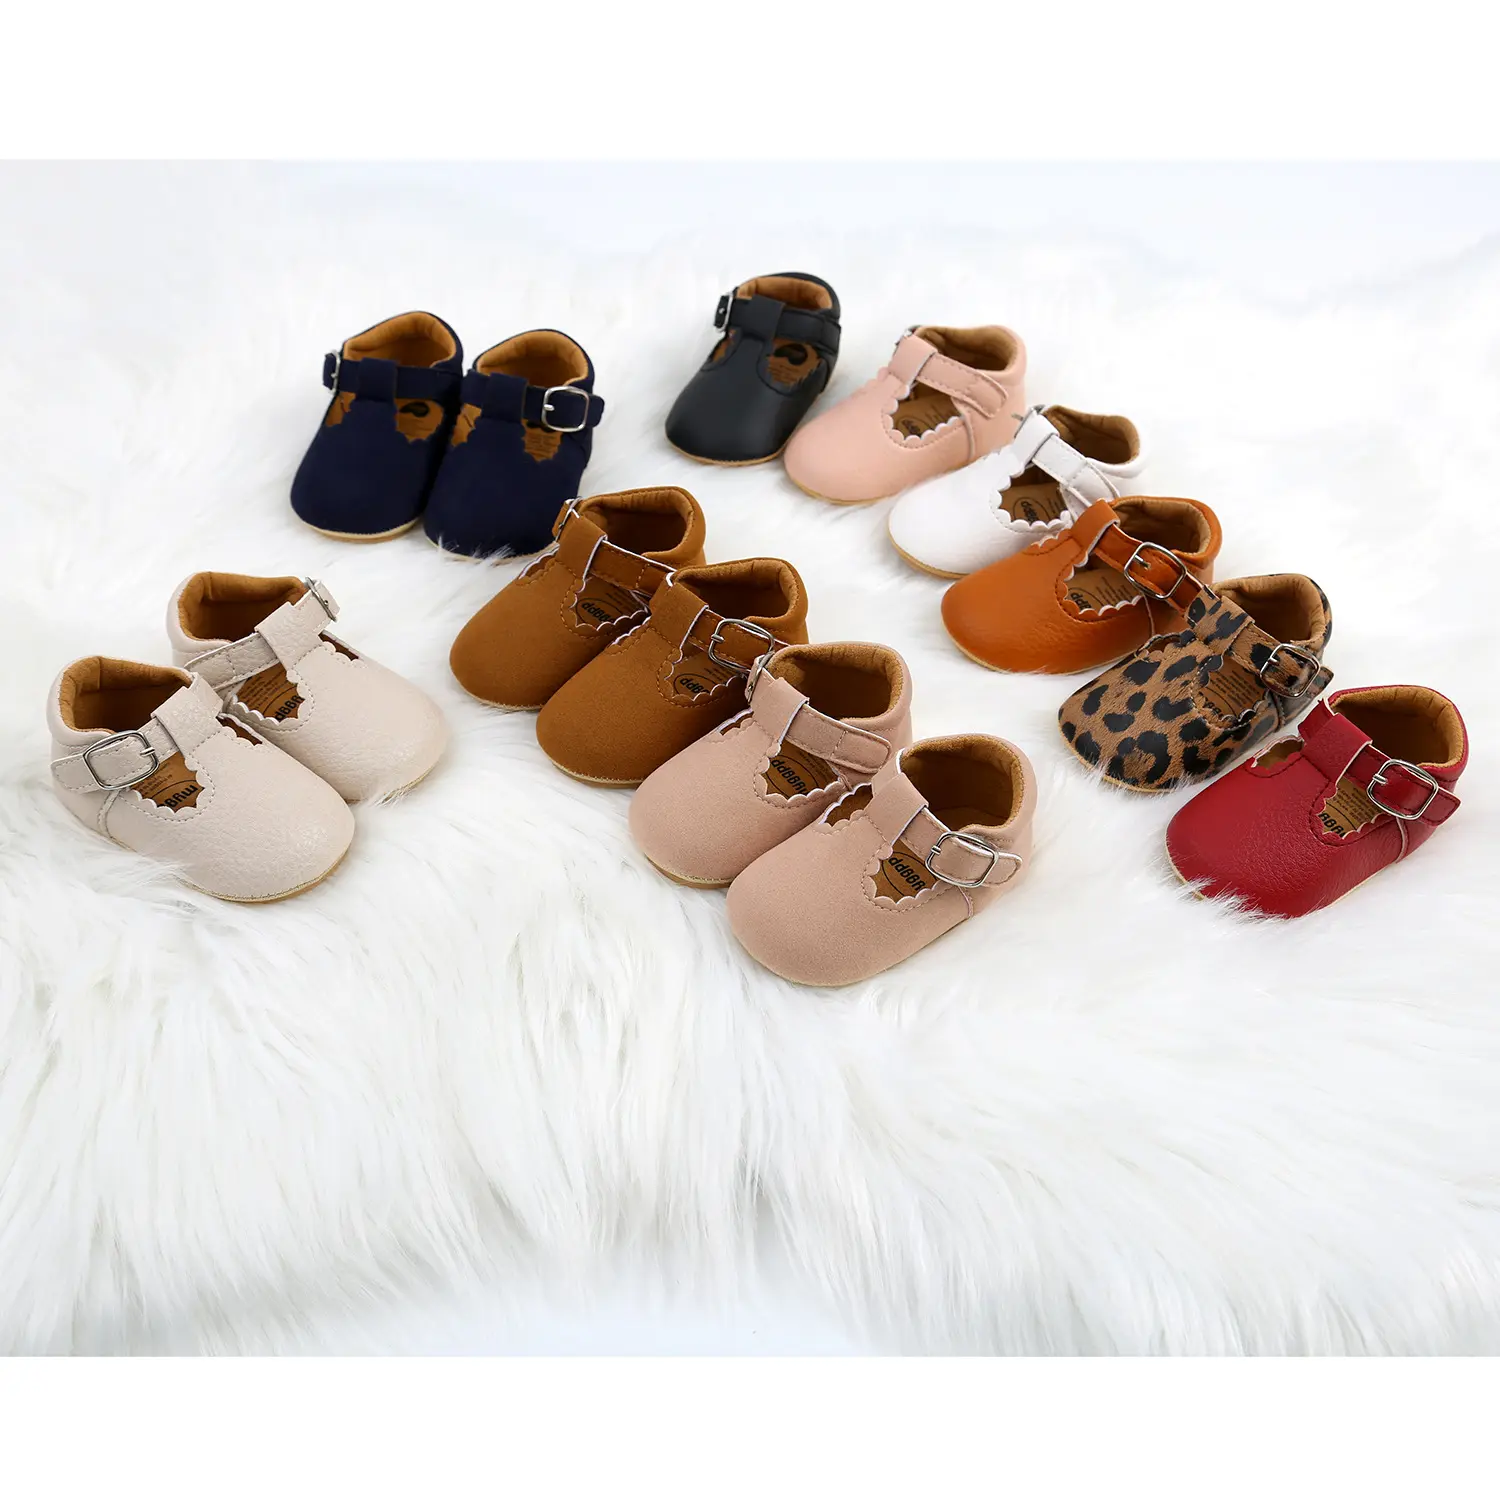 soft sole newborn infant anti-slip shoes spring autumn leather Mary Jane T bar girls princess toddler first walker baby shoes